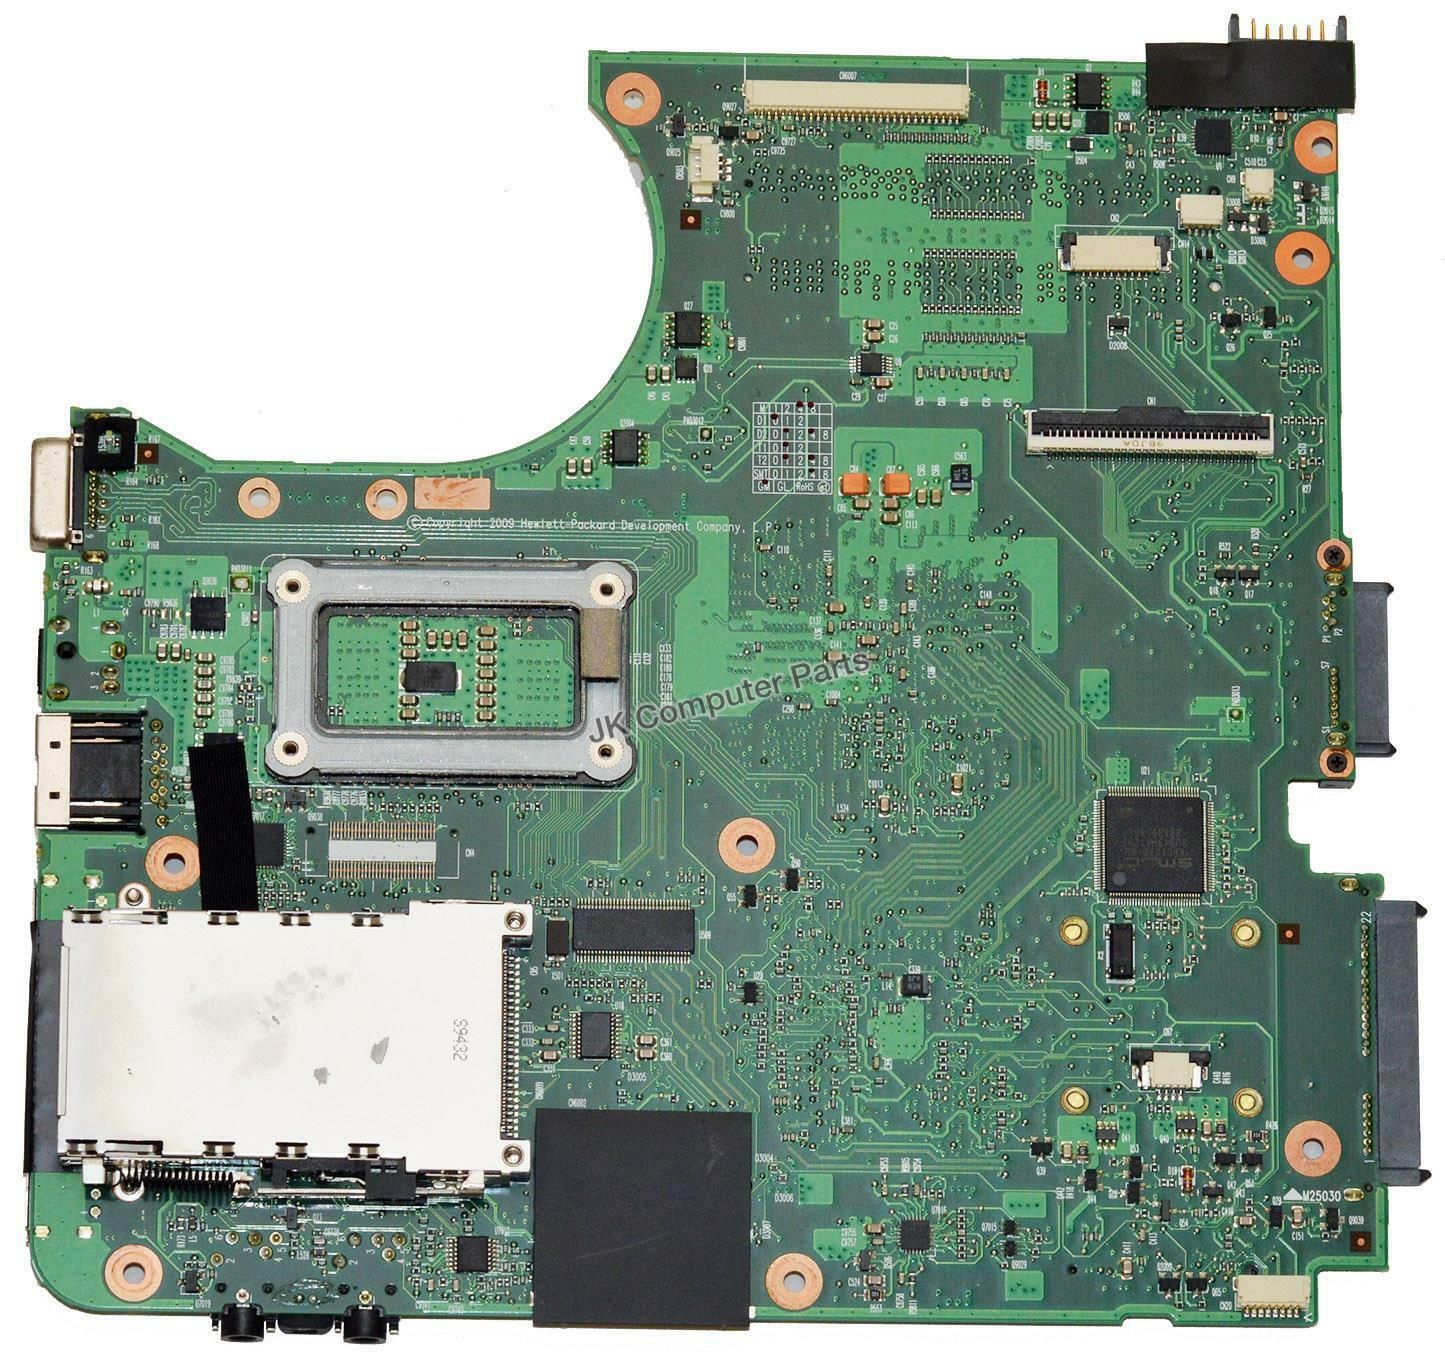 538409-001 Intel MOTHERBOARD for HP Compaq 510 610 Series LAPTOP A 